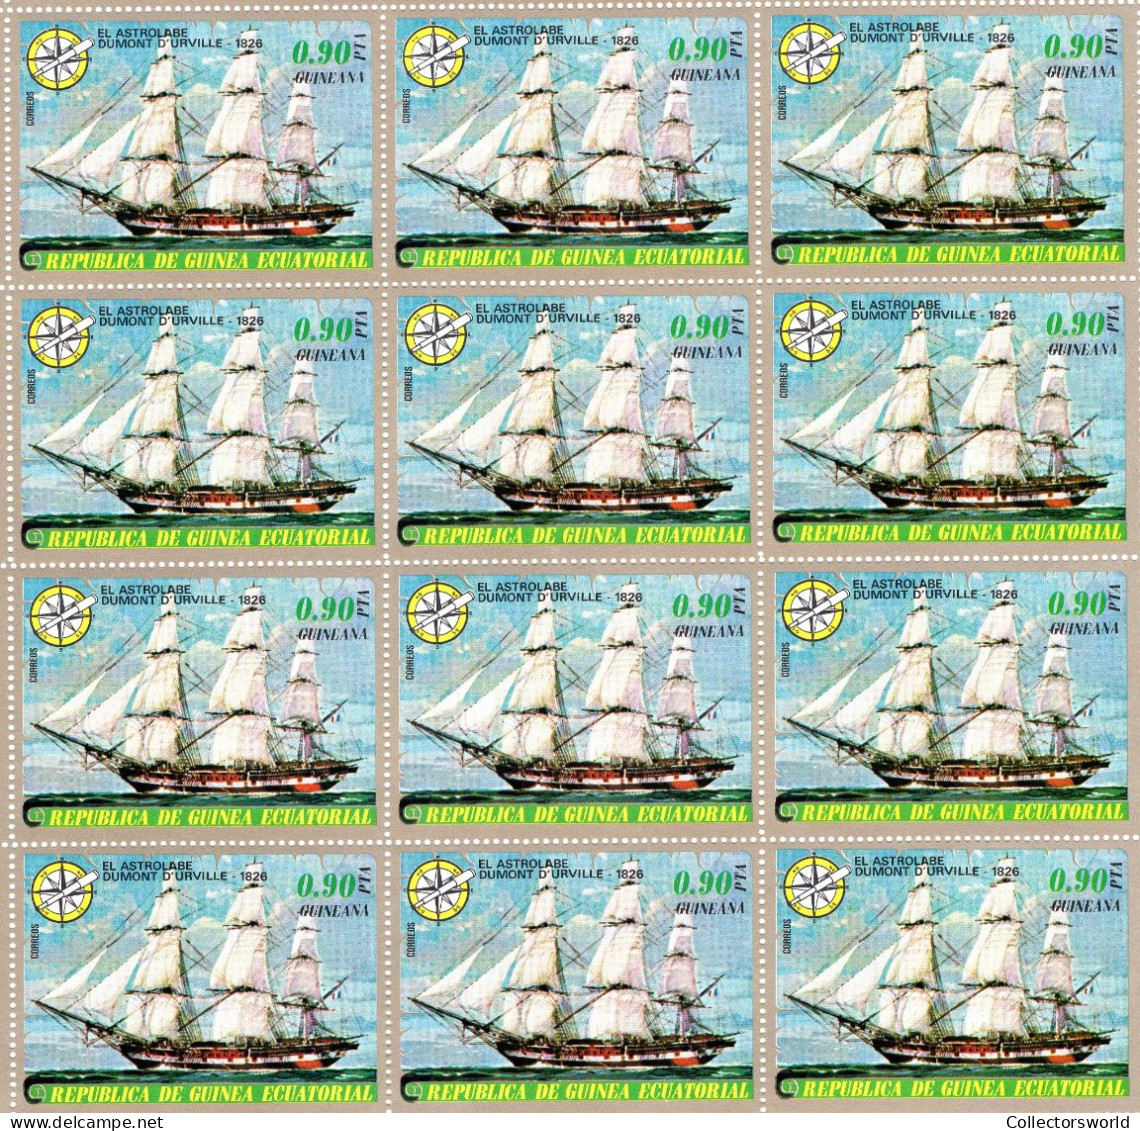 Equatorial Guinea serie 7v 1976 in complete MNH sheets - 12 series Conquerors of the Sea Tallships Sail ships MNH